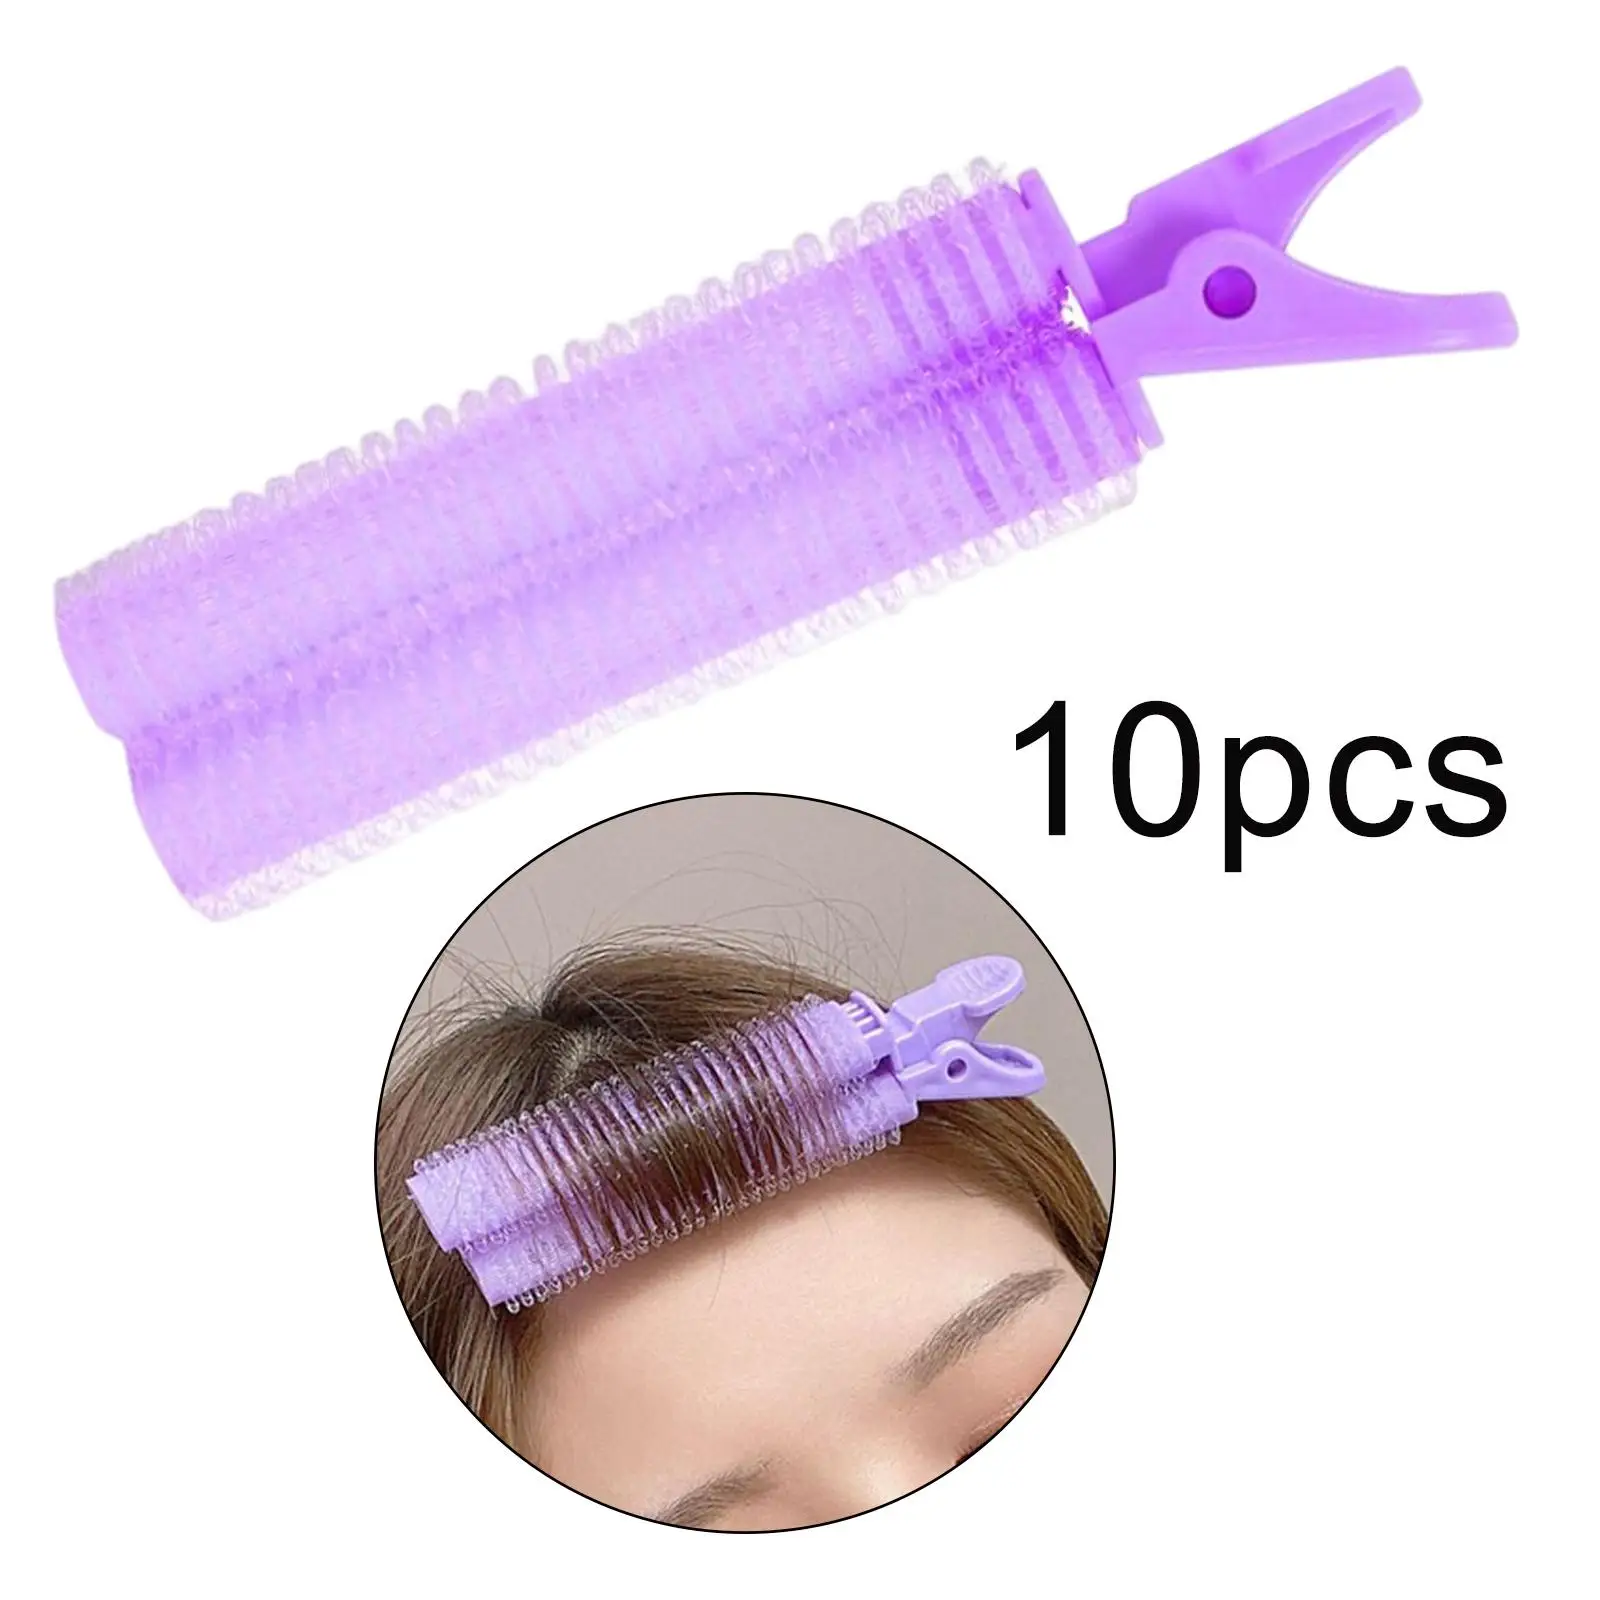 10 Pieces Hair Bangs Curling Clips Easy to Use Reusable Hair Curler Clips for Hair Styling Long Short Hair Hair Bangs Girls